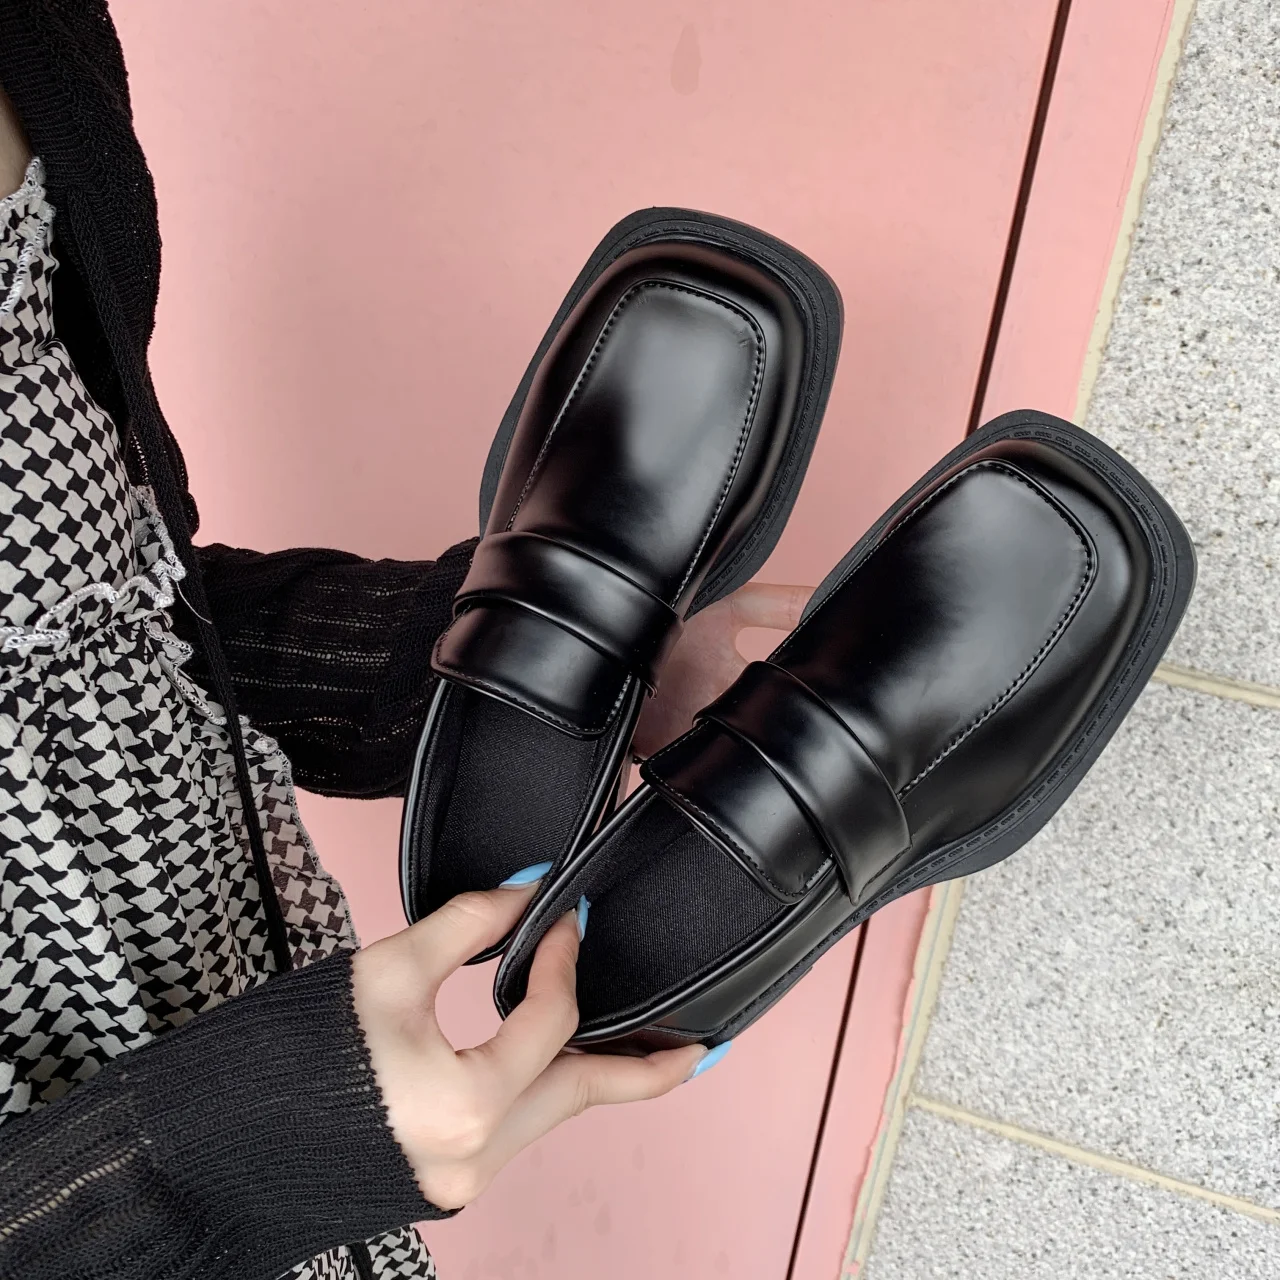 

Black Loafers Fall 2021Student Uniform Small Leather Shoes Retro British Style Fashion Women's Single Shoes High Heels Mary Jane